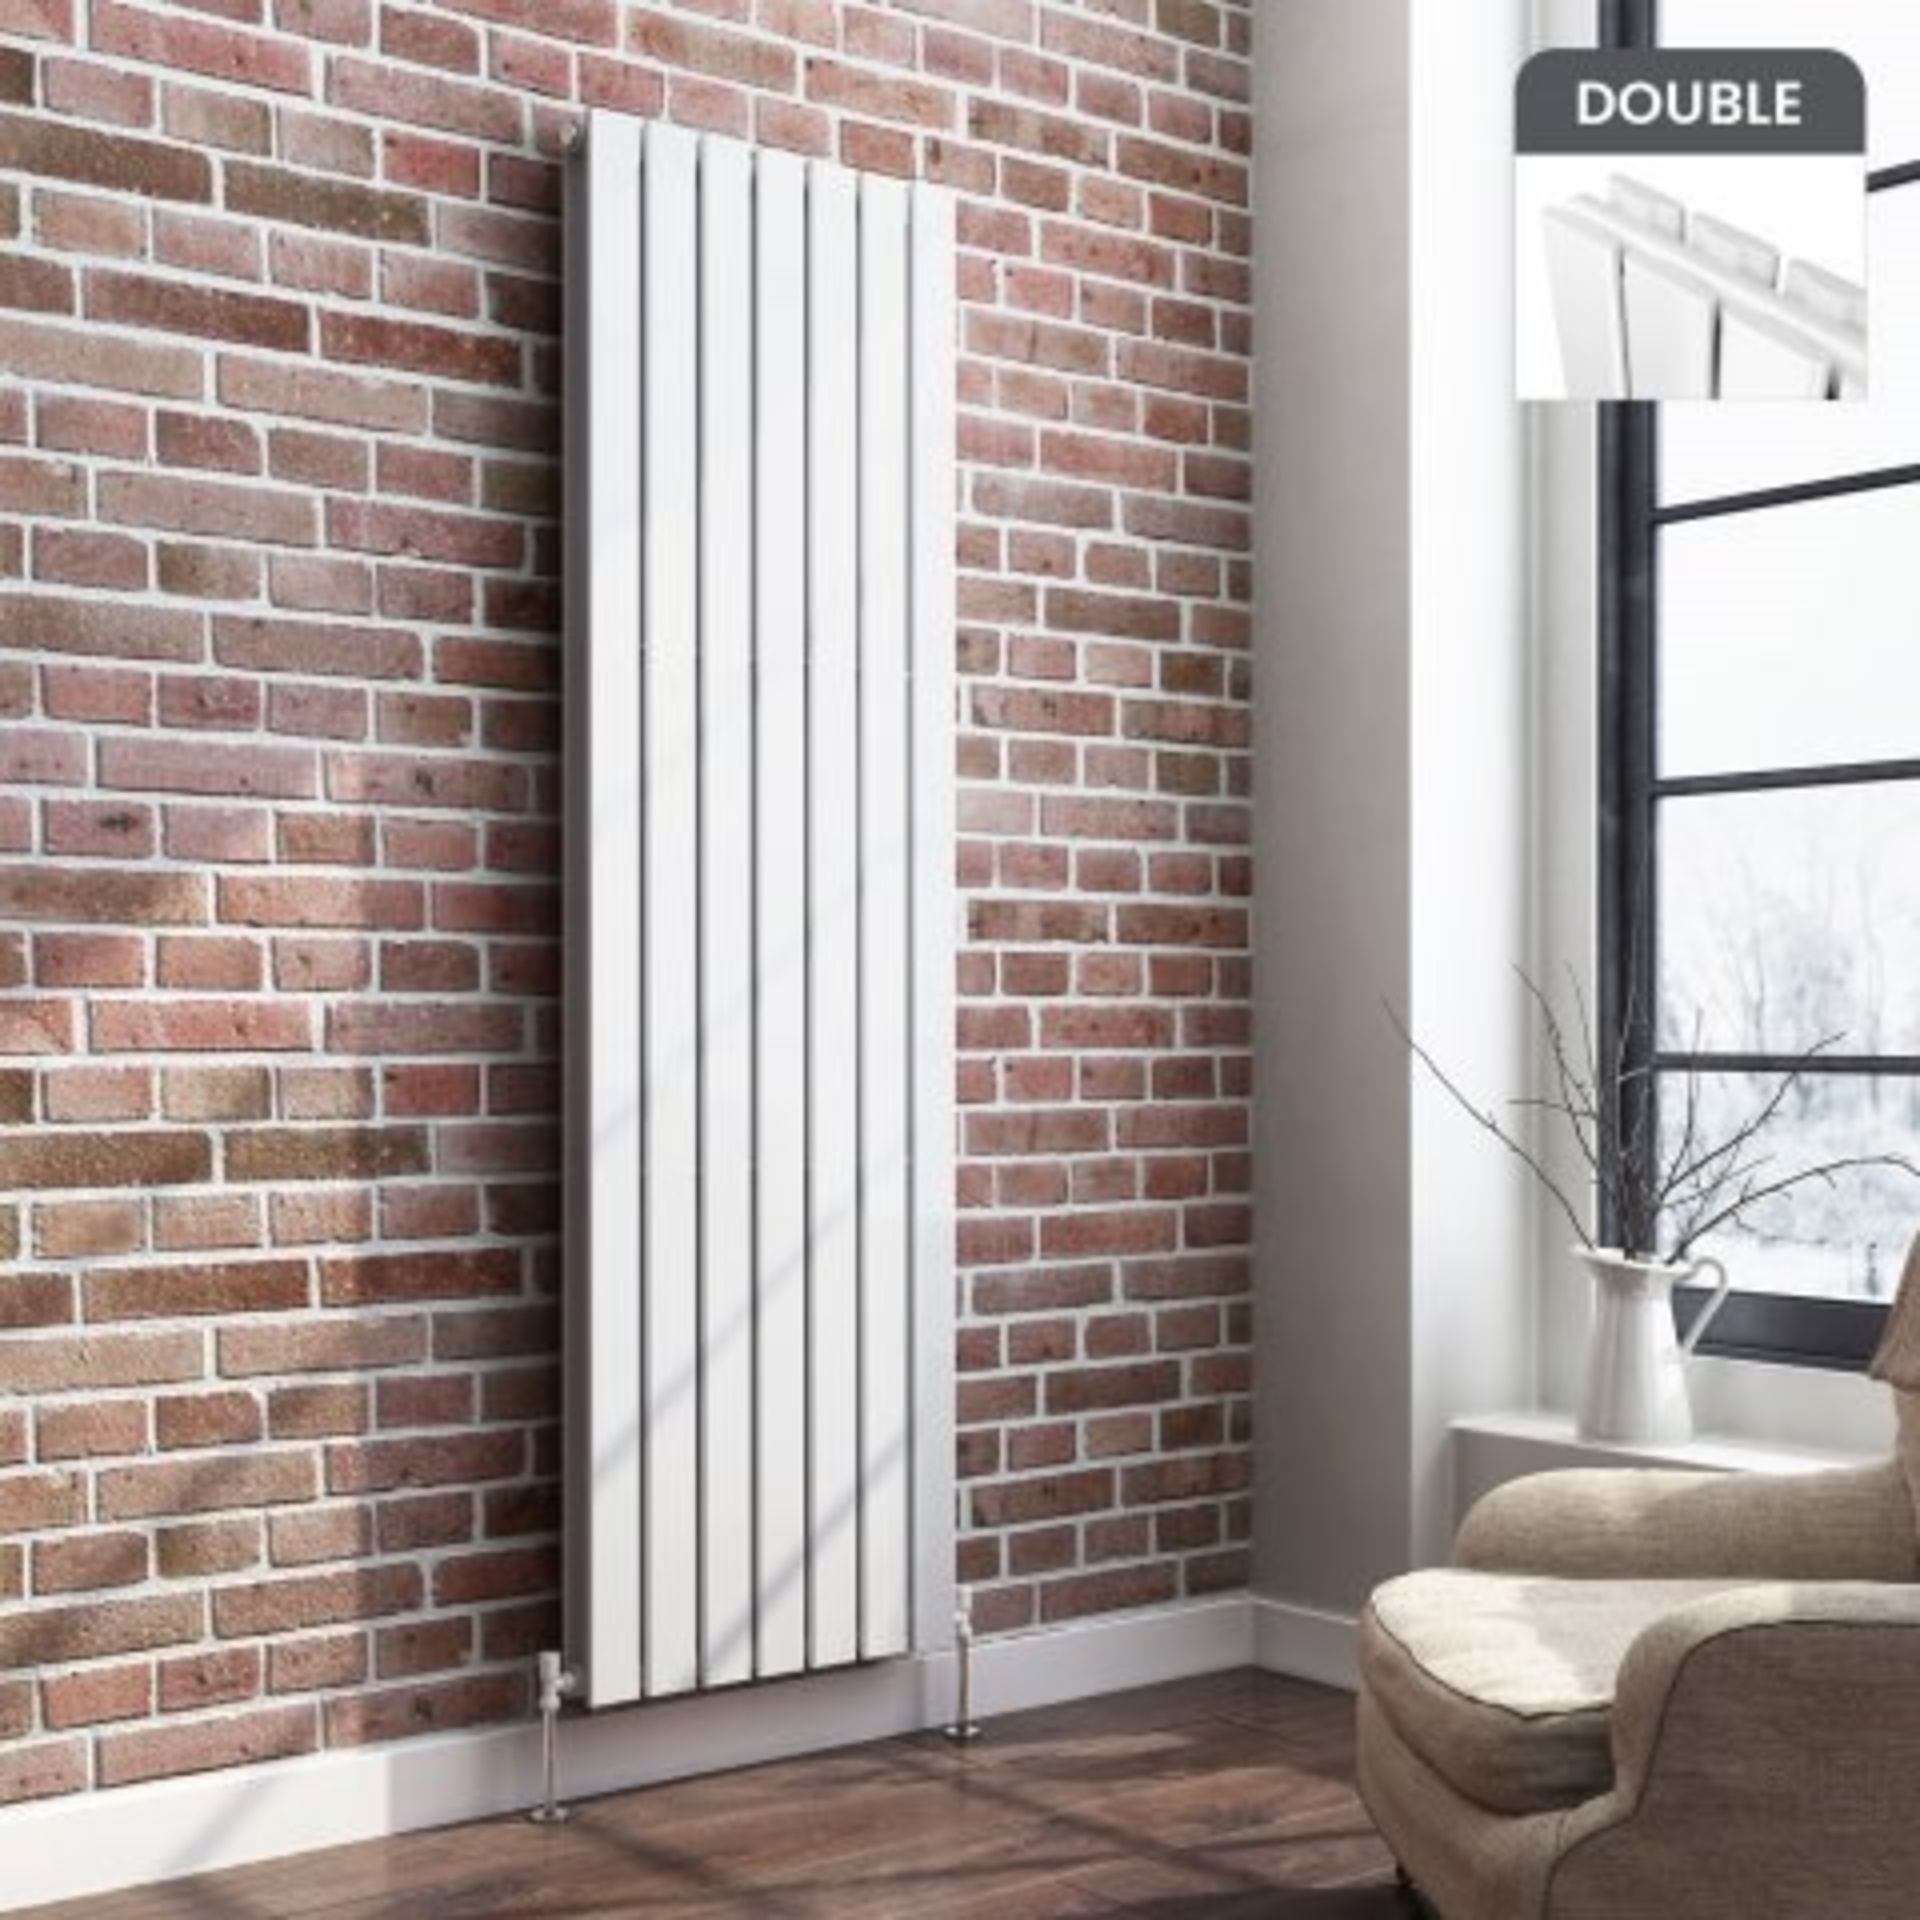 New 1800x532mm Gloss White Double Flat Panel Vertical Radiator. Rc262.Designer Touch Ultra-Mod... - Image 2 of 2